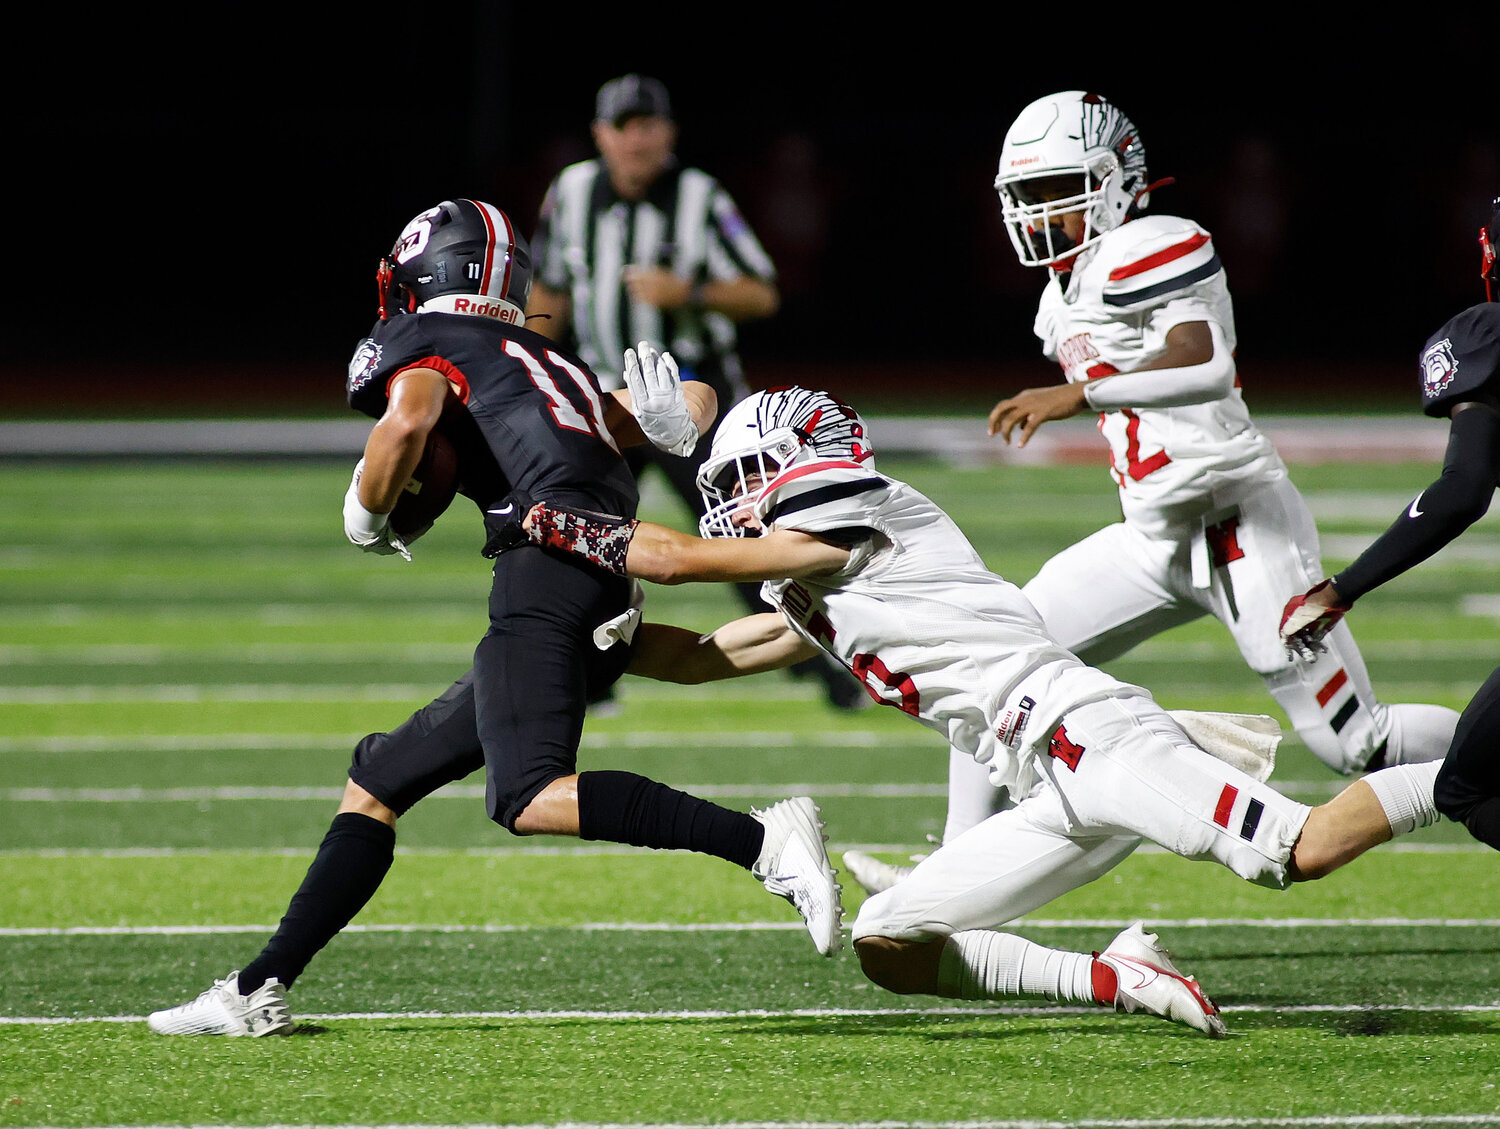 Warrenton's Ben Peth (6) reaches to tackle Fort Zumwalt South's Logan Vogt (11), Friday, Aug. 25, 2023, at Fort Zumwalt South High School in St. Peters, Mo.